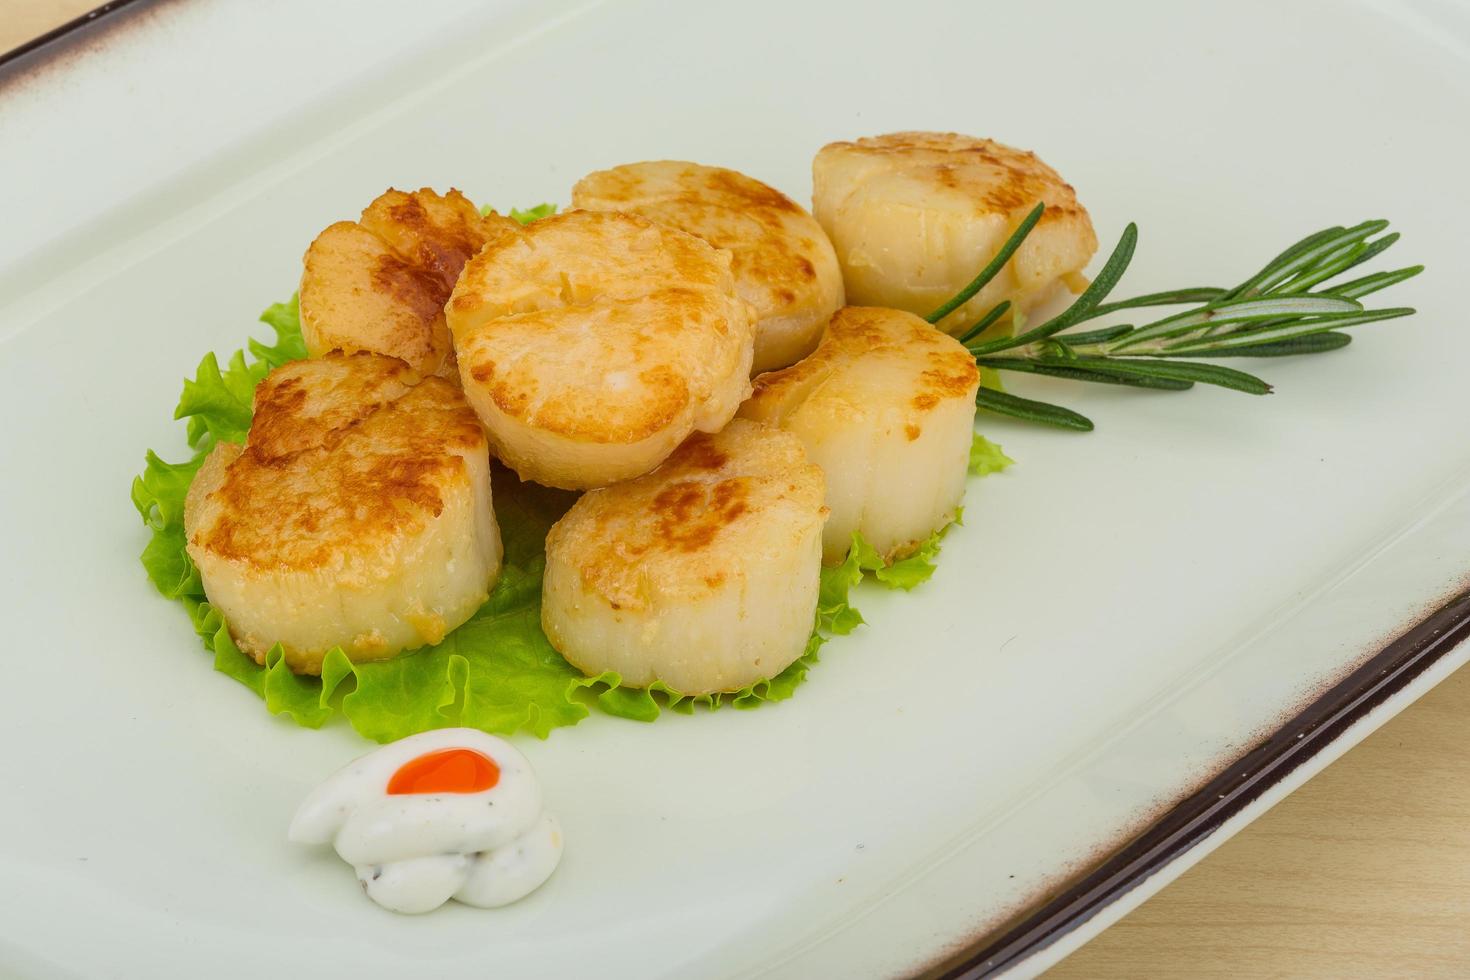 Grilled scallops on the plate and wooden background photo